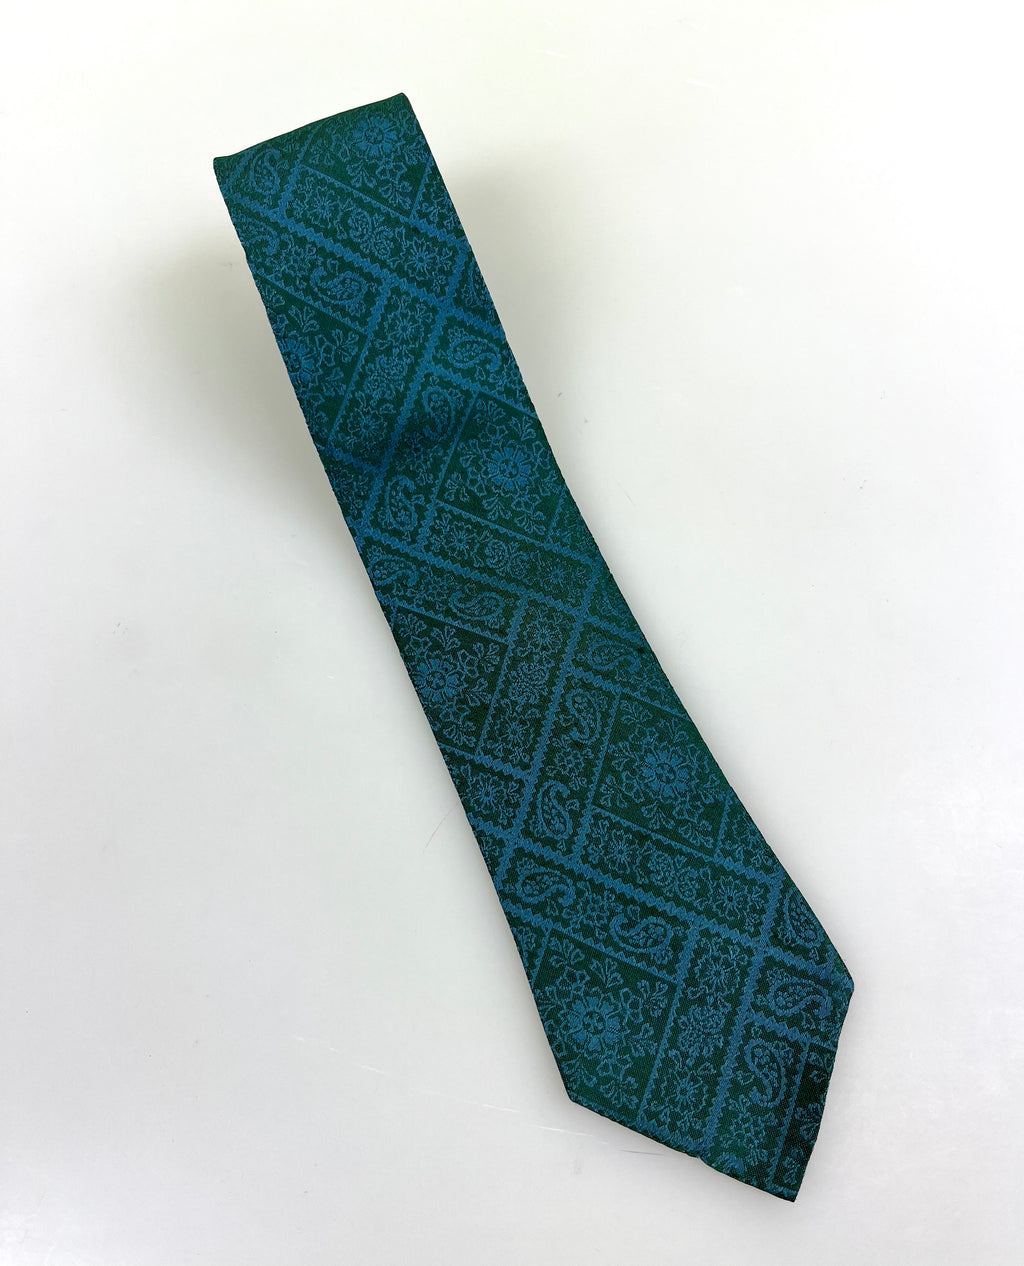 Teal and Green Brocade Tie